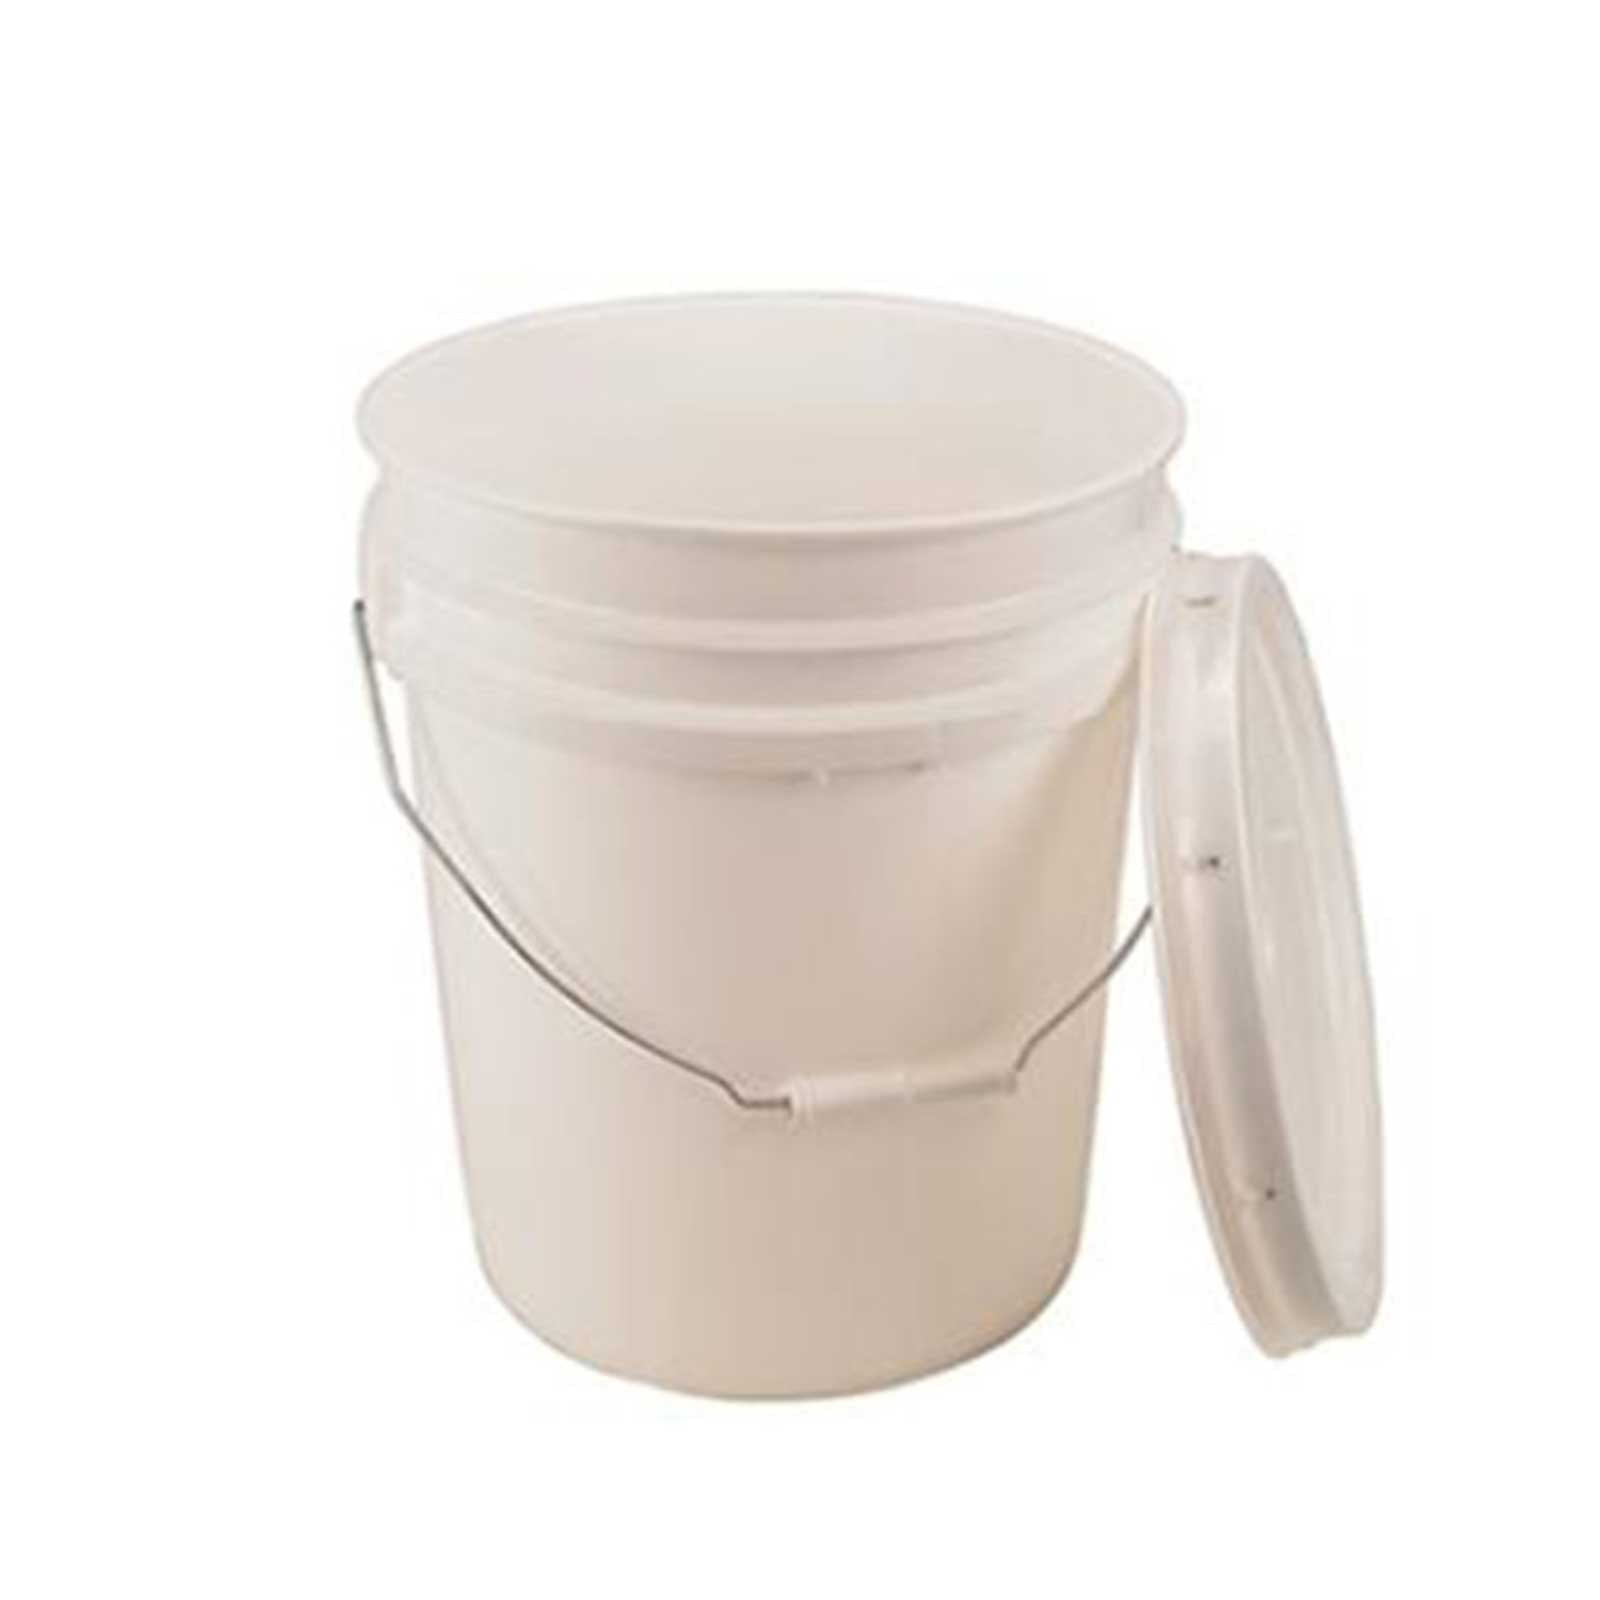 5 gal. BPA Free Food Grade Bucket with Wire Handle and Lid (T40MW) -  starting quantity 1 count - FREE SHIPPING - ePackageSupply